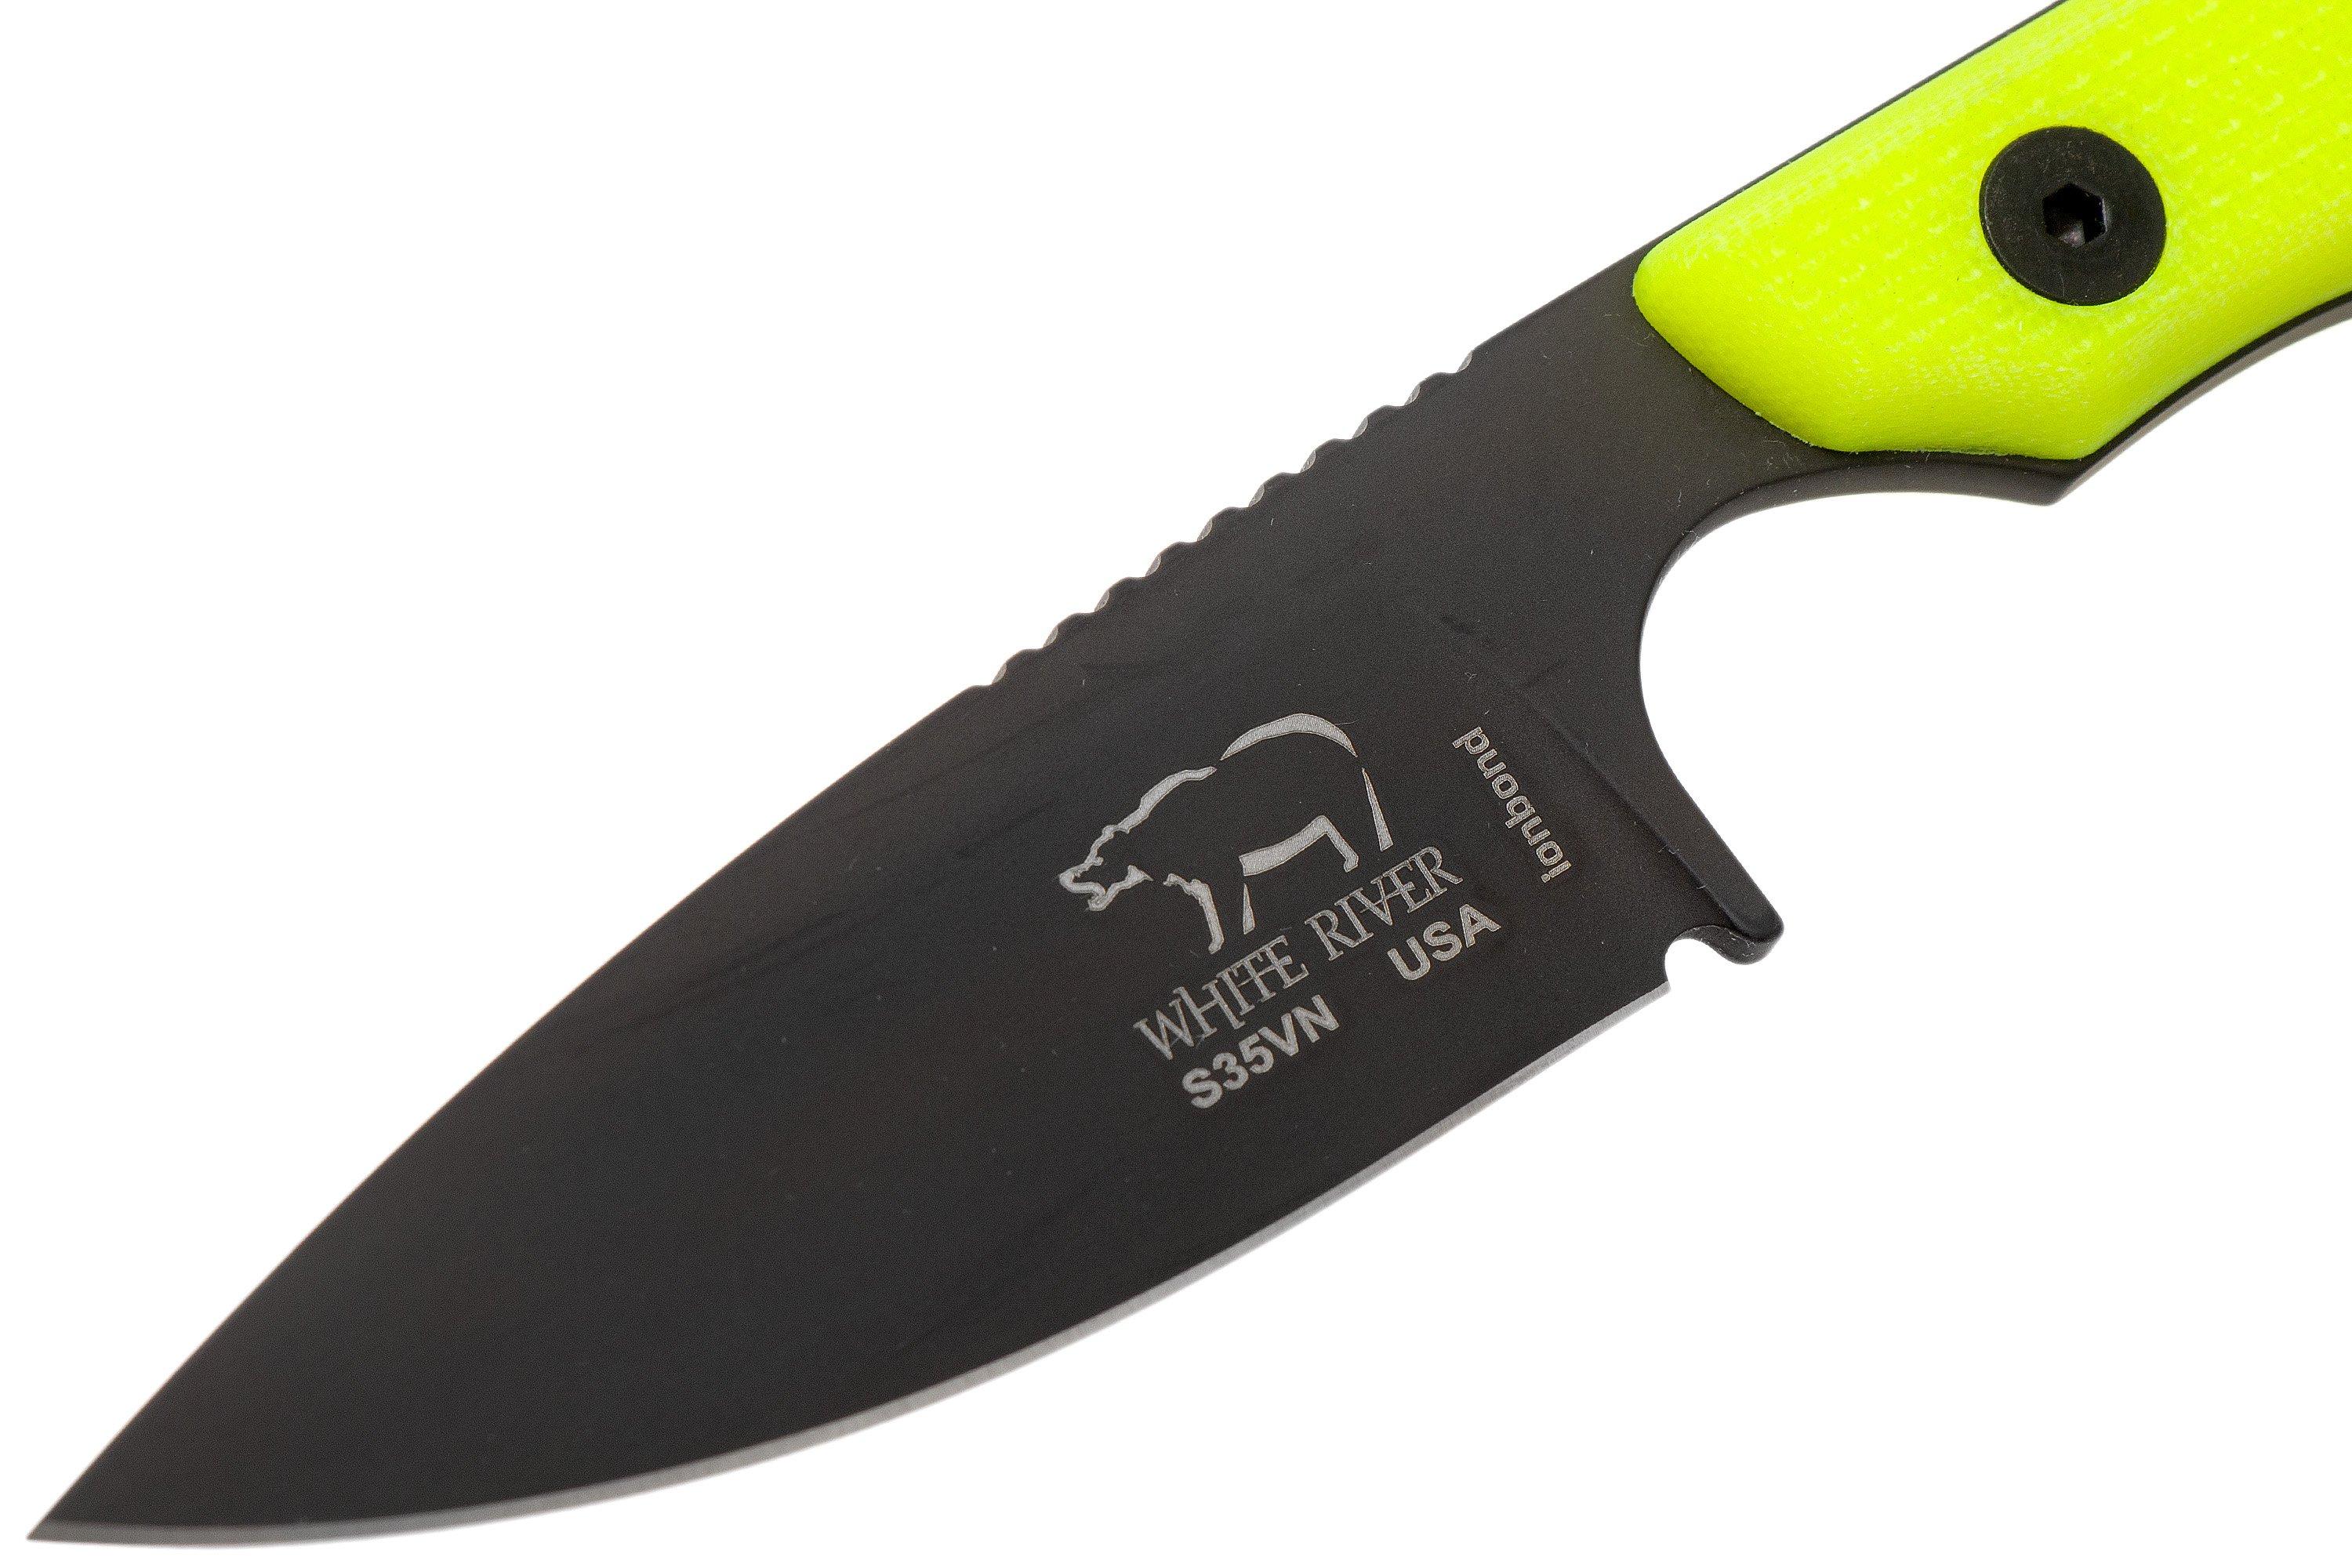 White River Knives M1 Backpacker Pro Yellow G10, Black Ionbond couteau